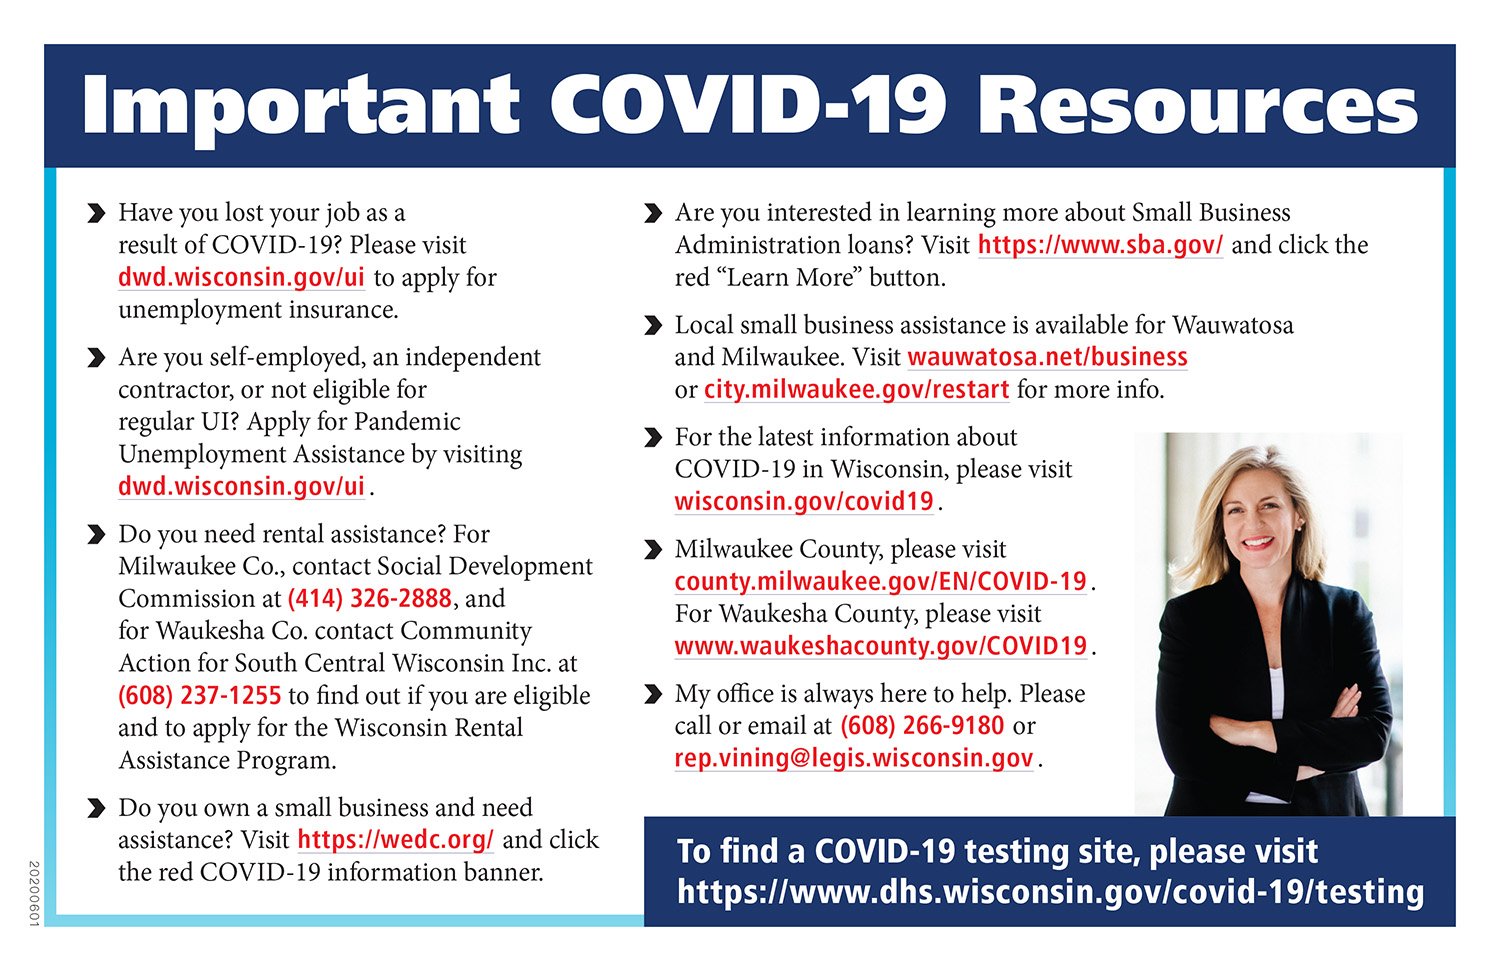 20200601 VINING MailerCard COVID-19-1 Front.jpg